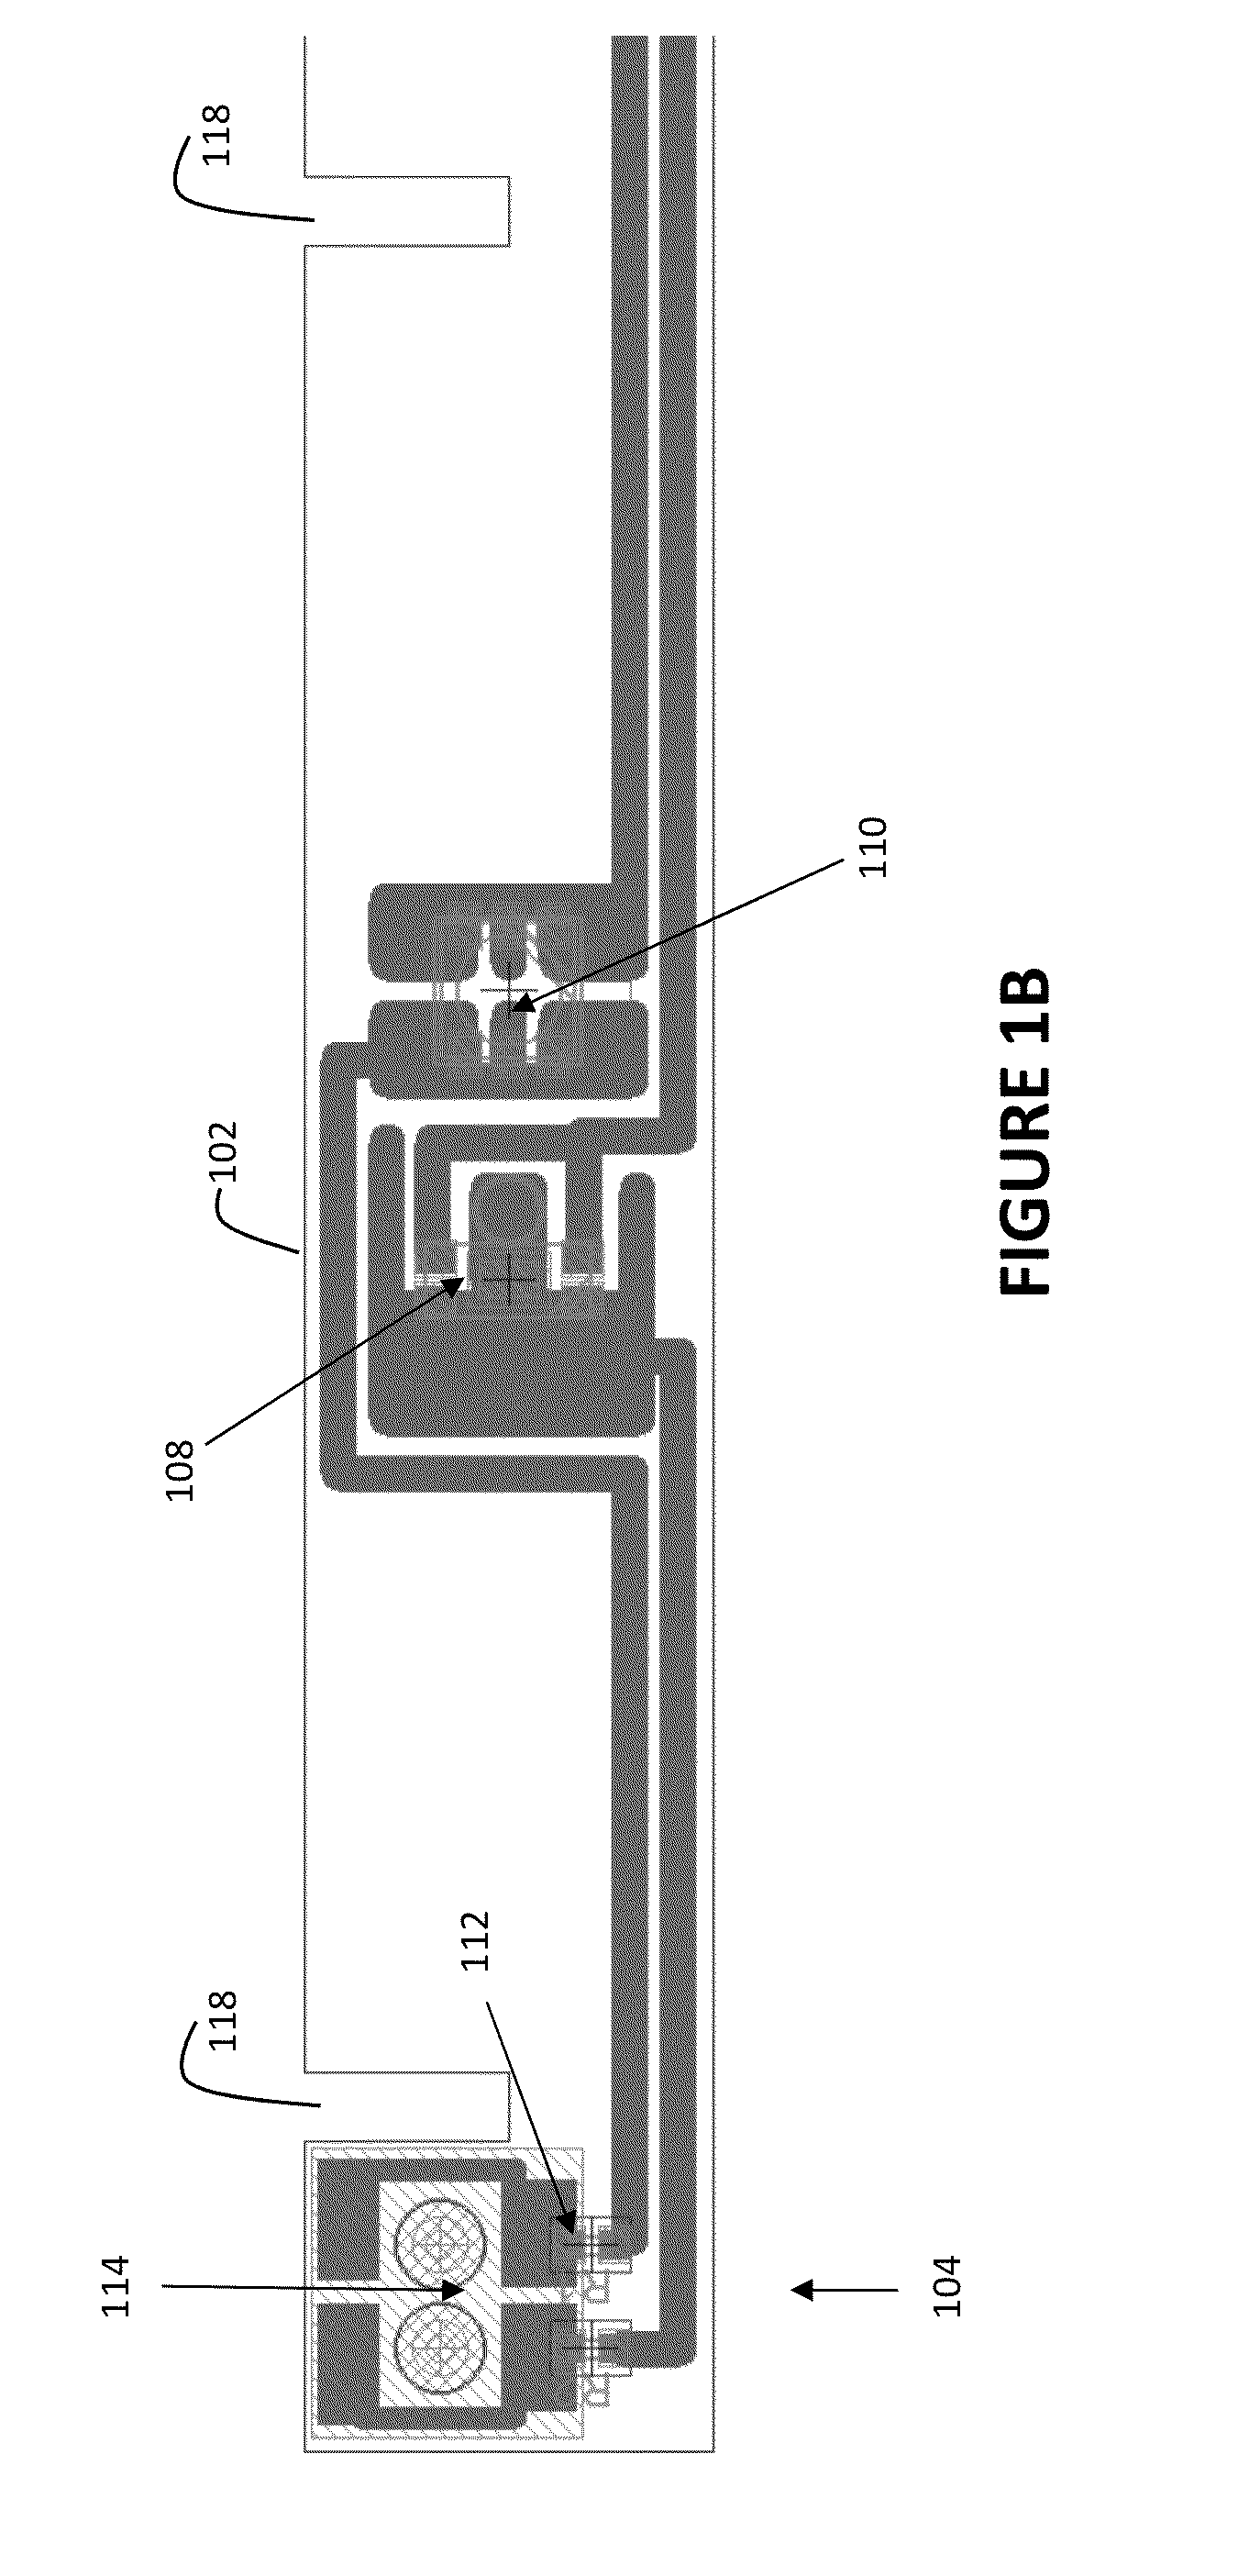 Apparatus and system for emitting light using a grid light engine